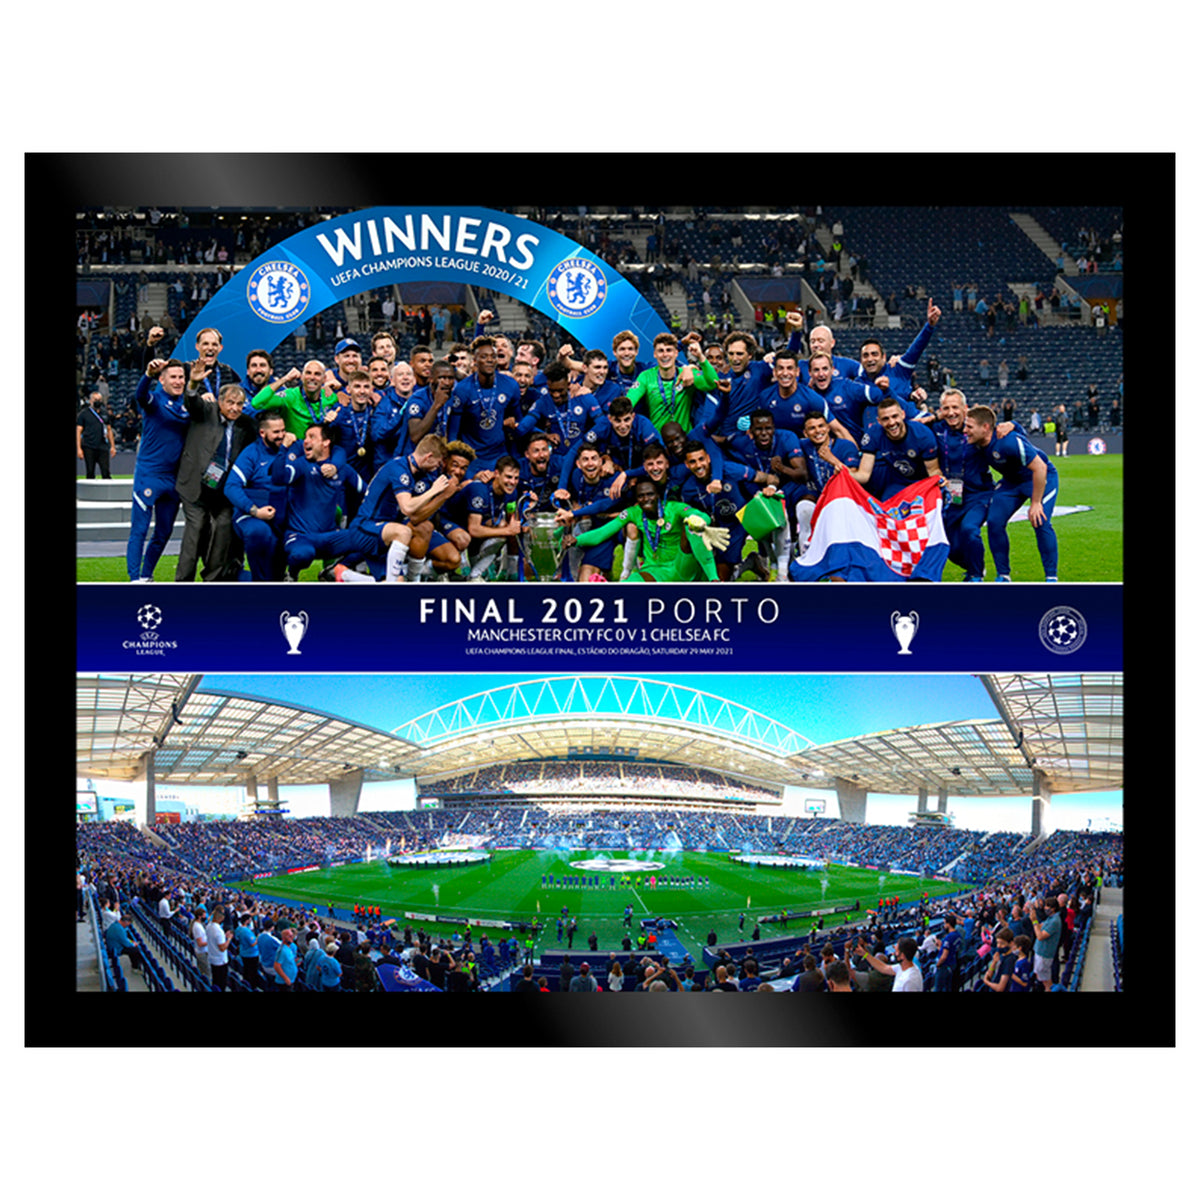 Champions League 2021 Final Celebration Montage 8x6 Tempered Glass